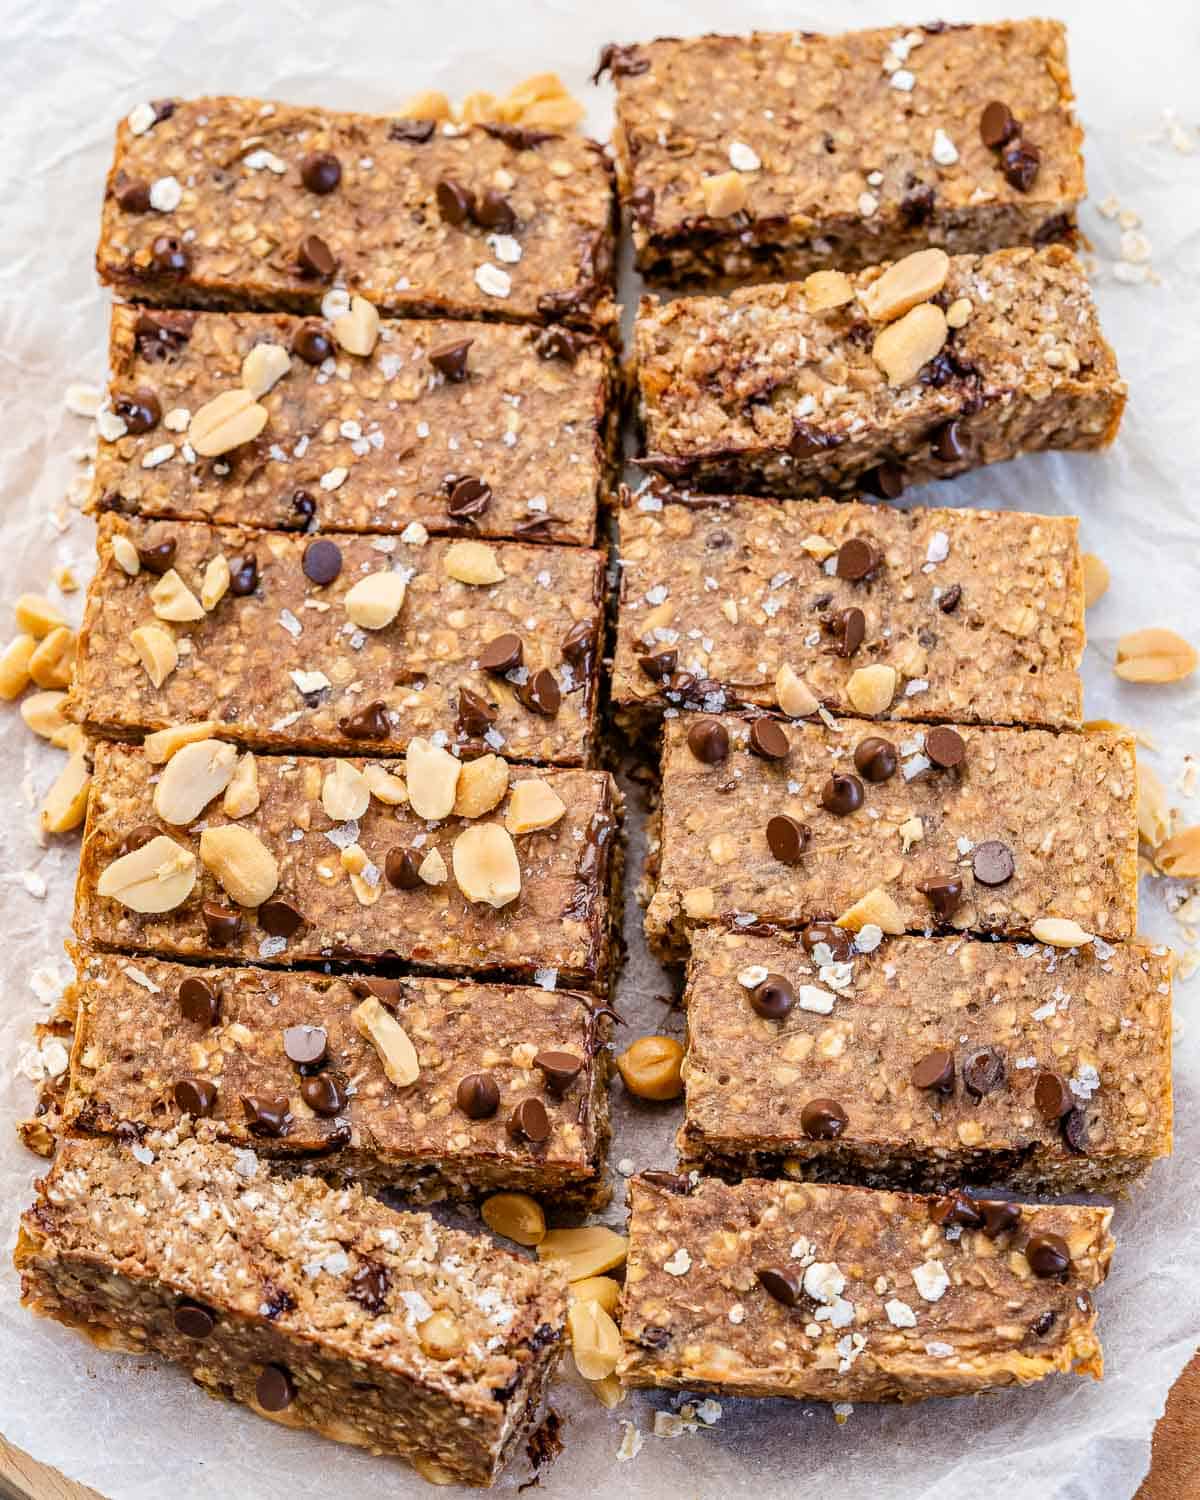 baked oatmeal bars with chocolate chips and peanuts 